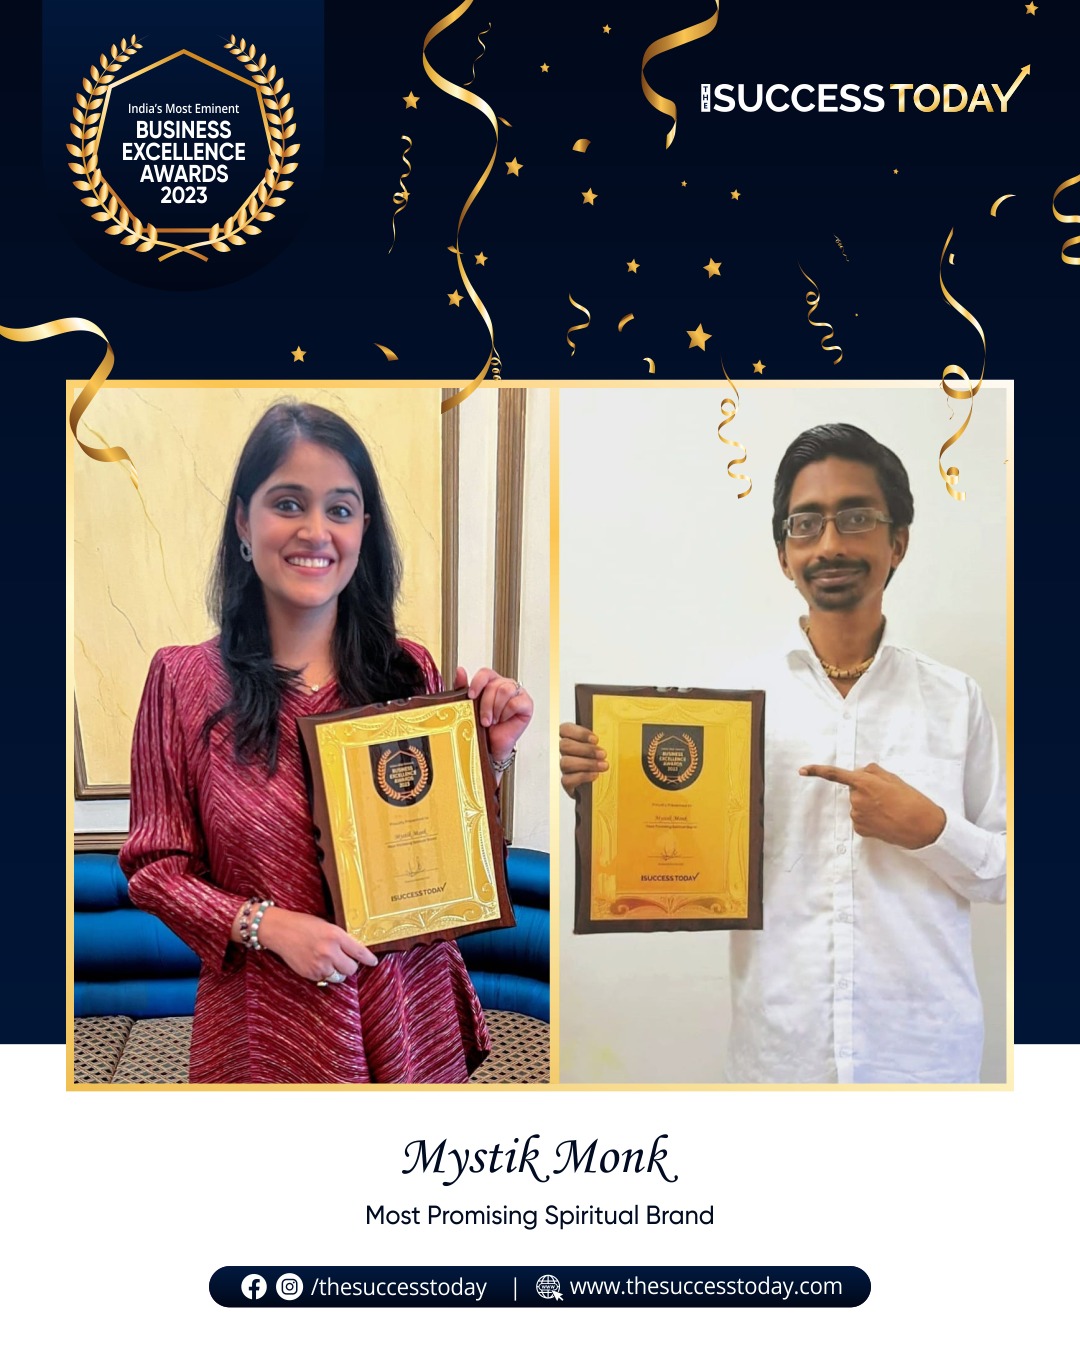 Swati Aggarwal & Mehul Vora - Co-Founders | Mystik Monk - The Success Today - Success Today - thesuccesstoday